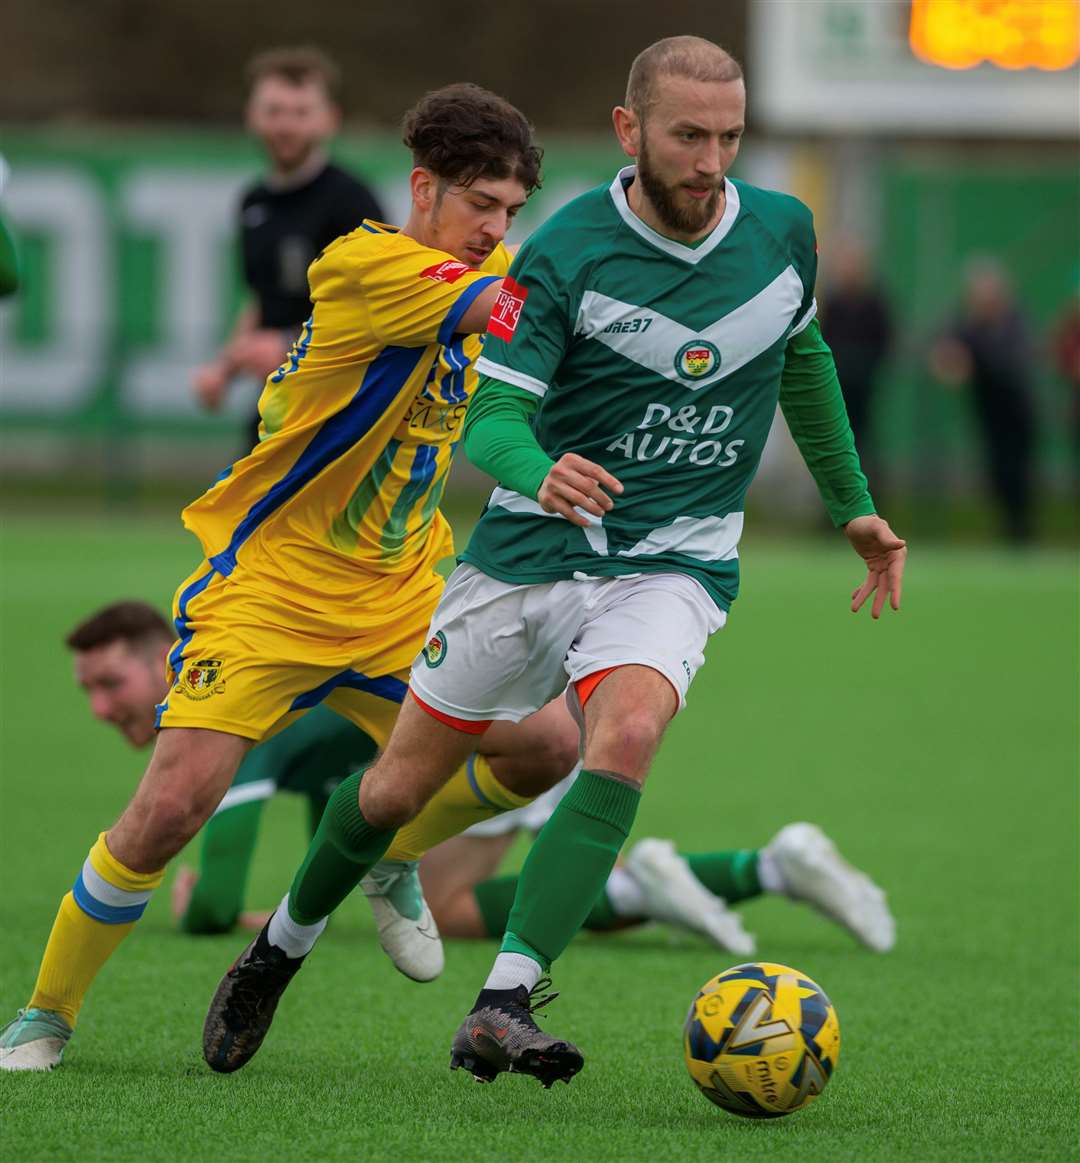 Robbie Rees on the ball for Ashford against Sittingbourne last weekend. Picture: Ian Scammell